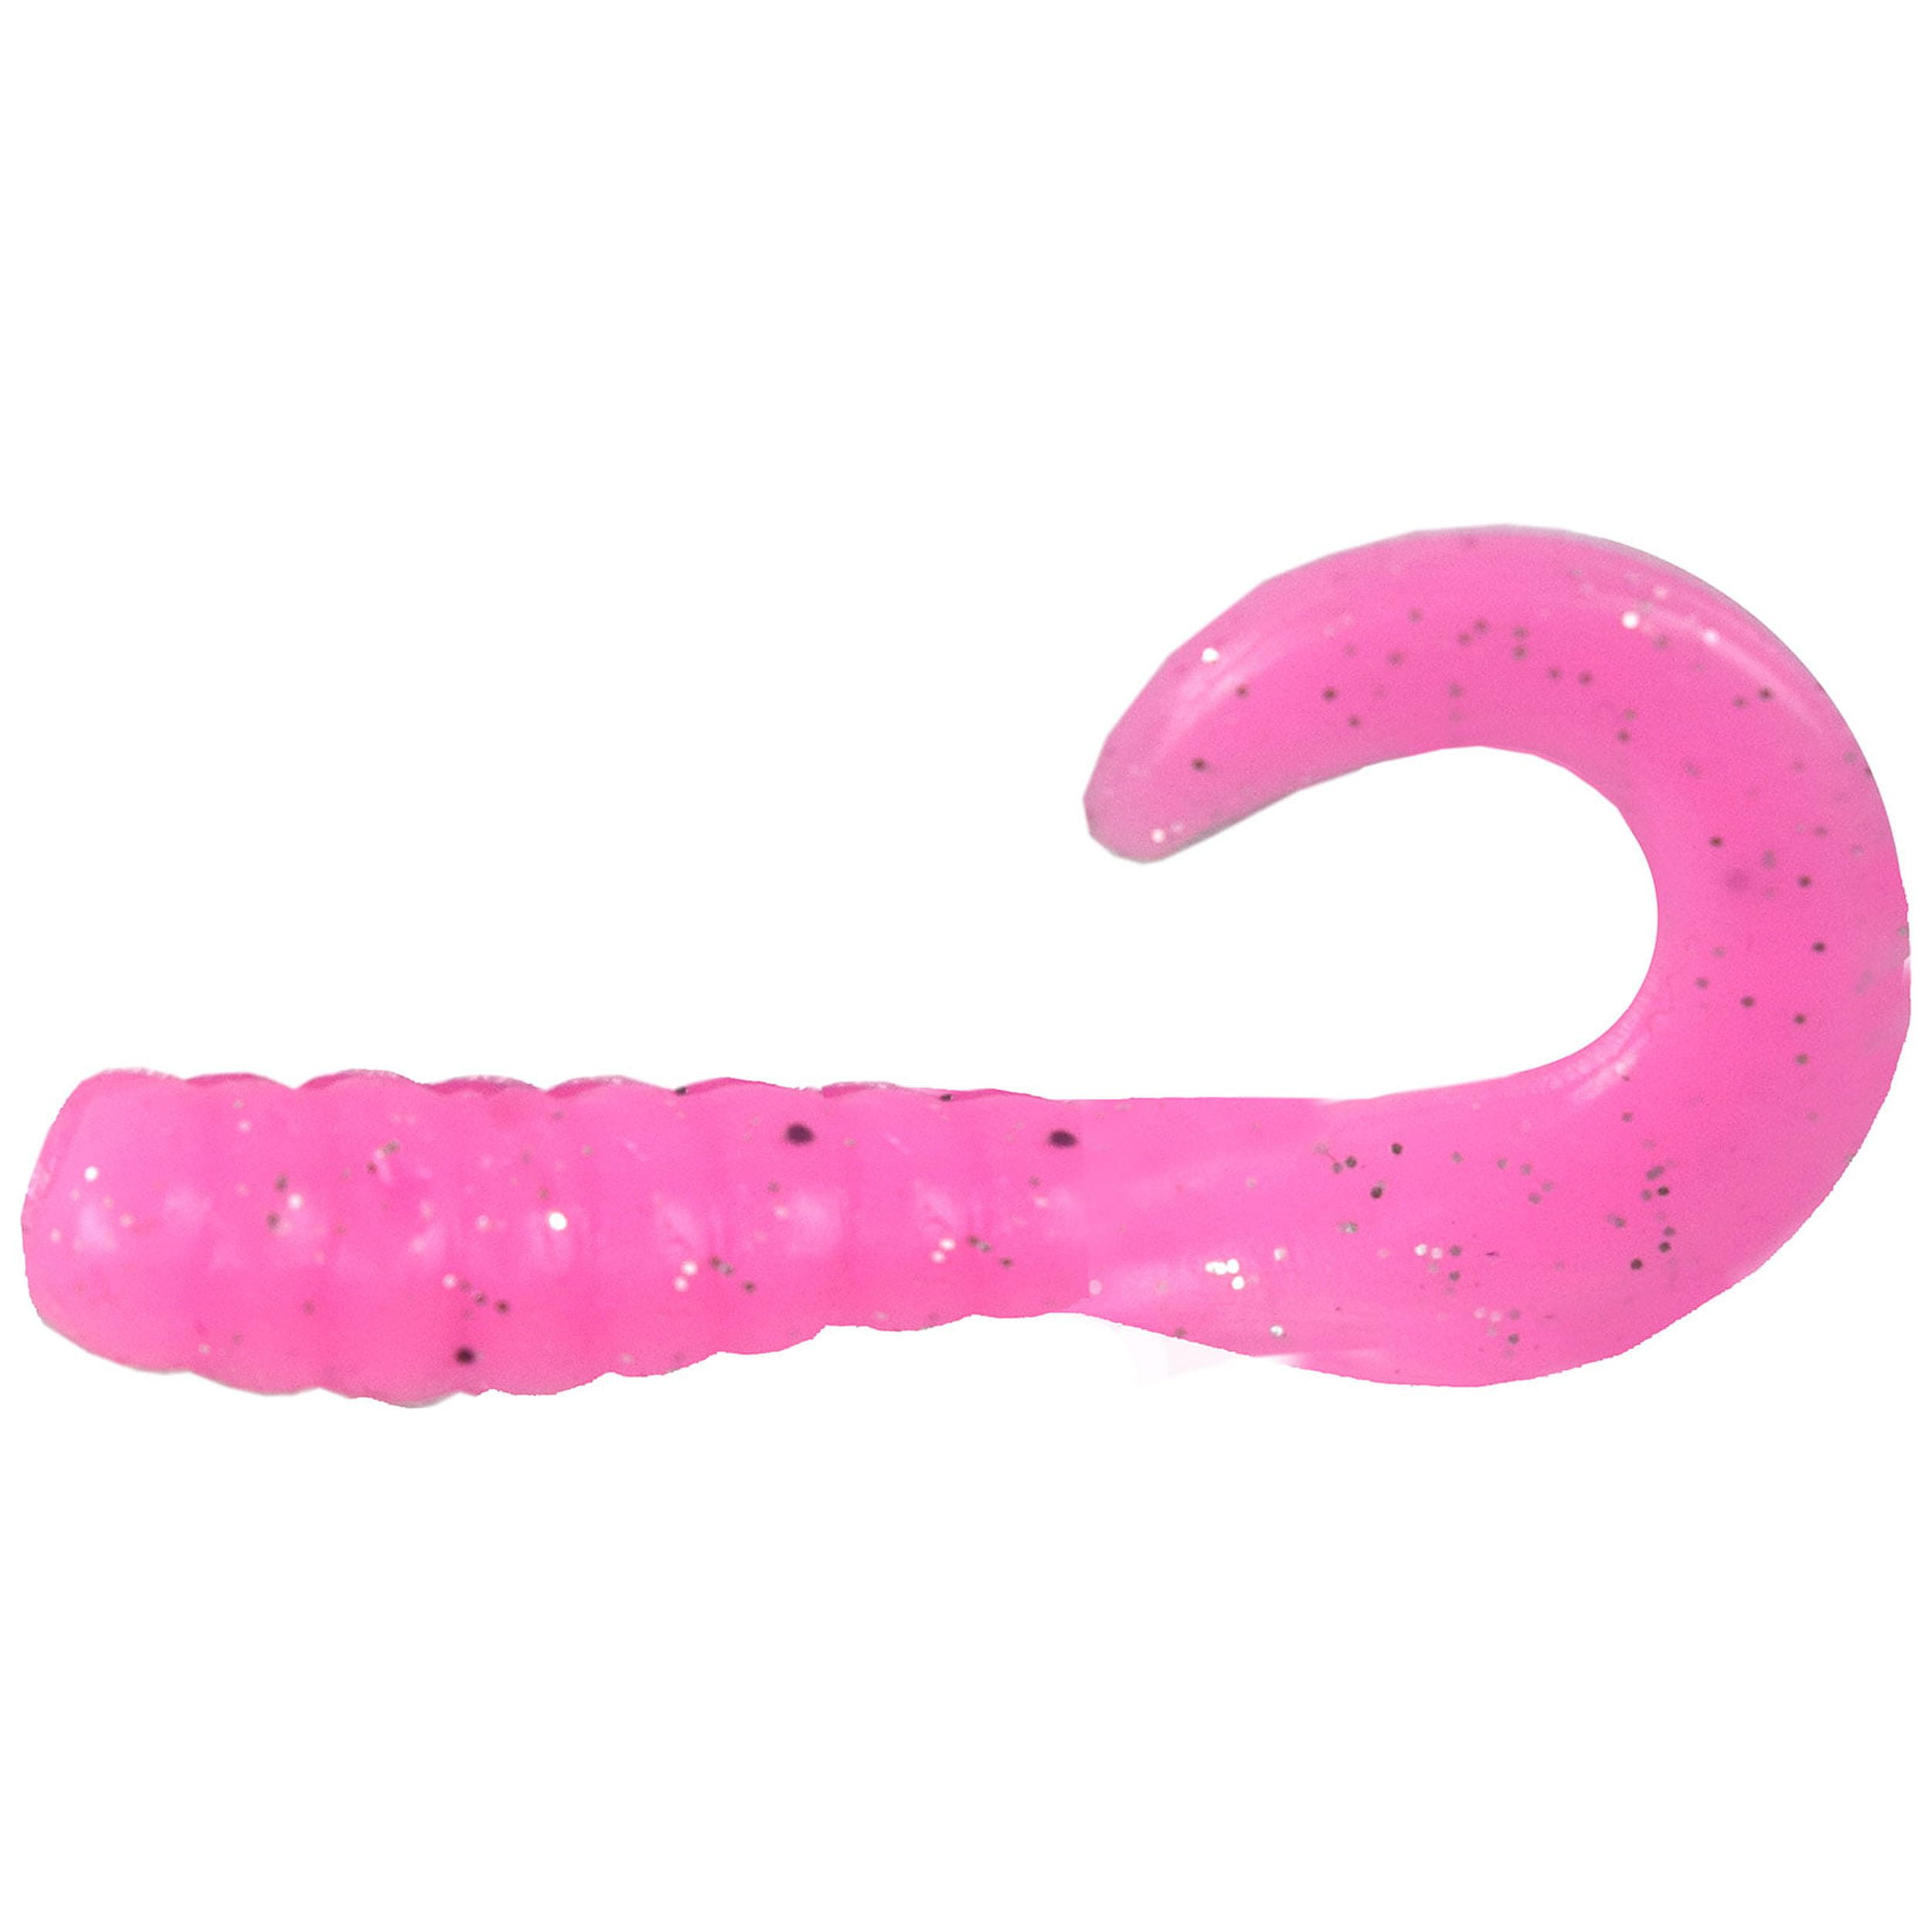 Tackle HD 40-Pack Grub Fishing Lures, 2-Inch Skirted Grub with Curly Tail,  Bulk Fishing Grubs for Crappie, Bass, Walleye, or Trout Bait, Freshwater or  Saltwater Swimbait, Fluorescent Pink 